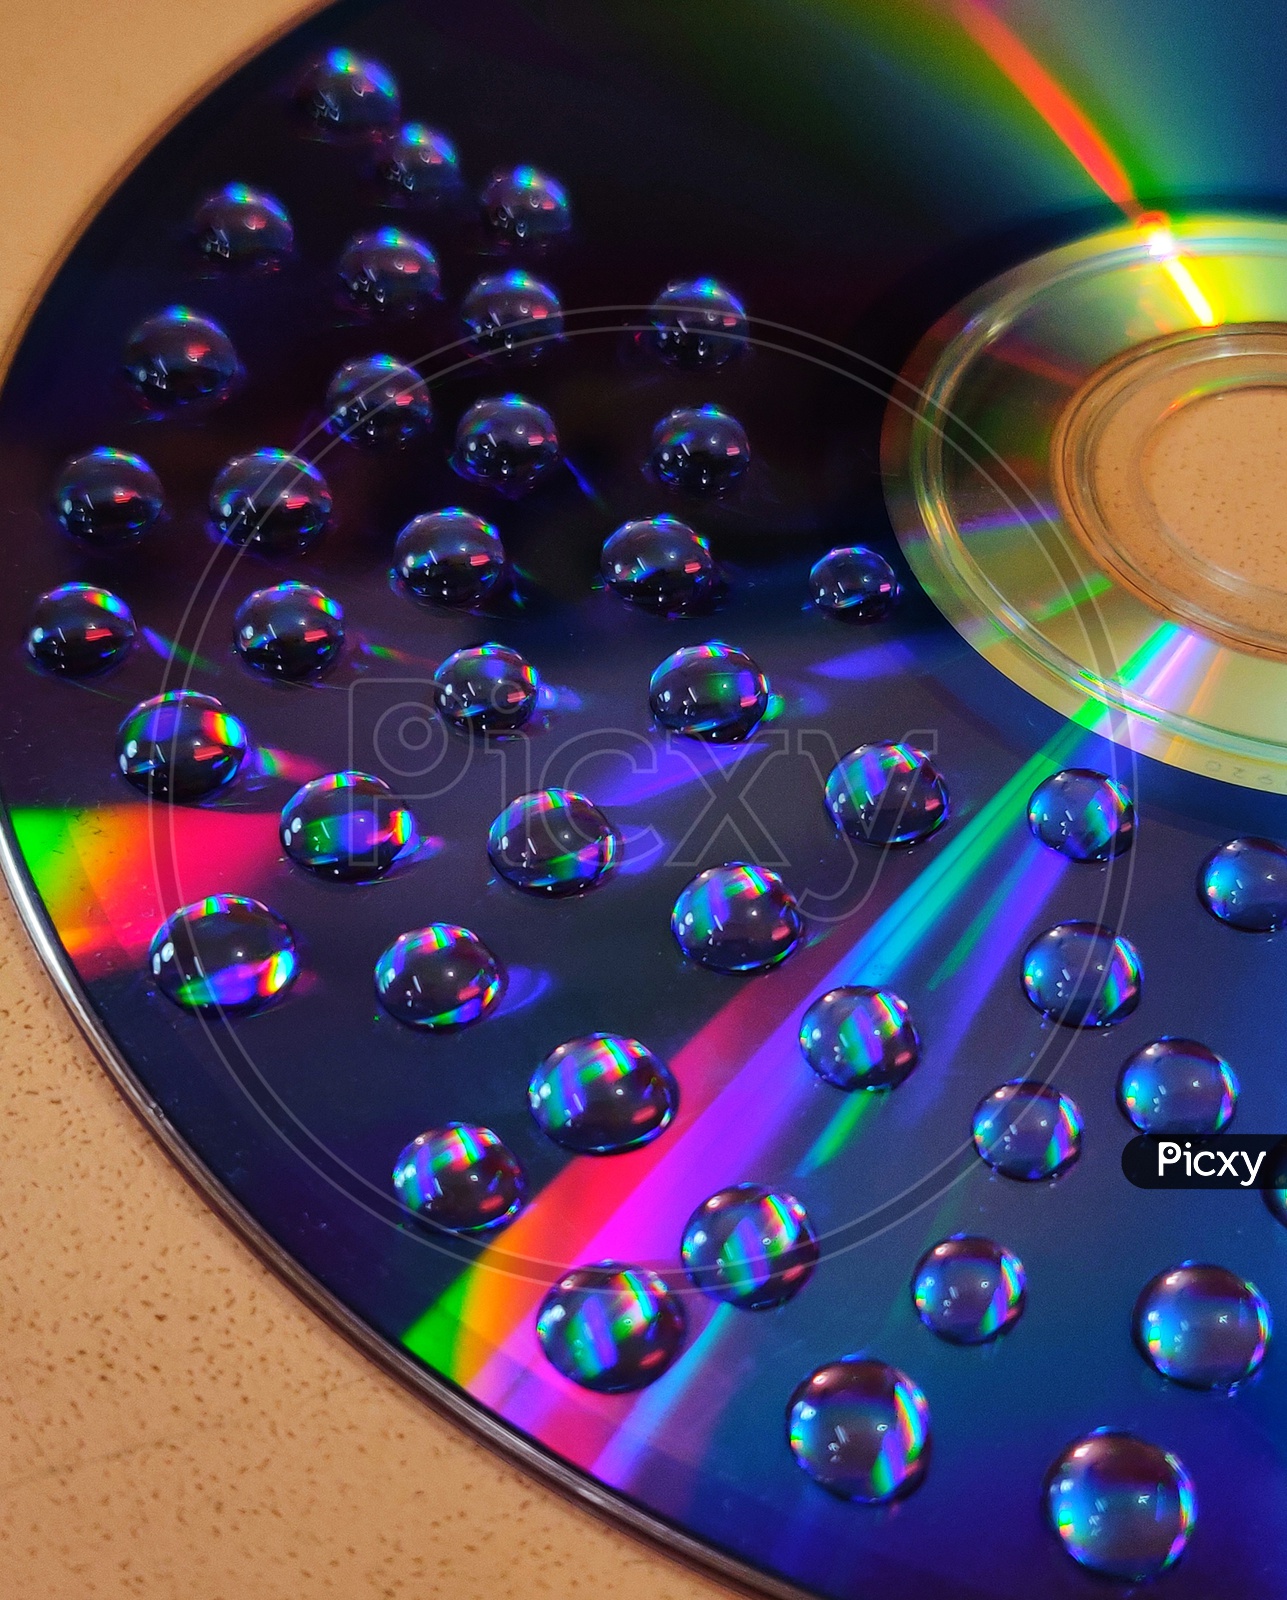 Water on the disc